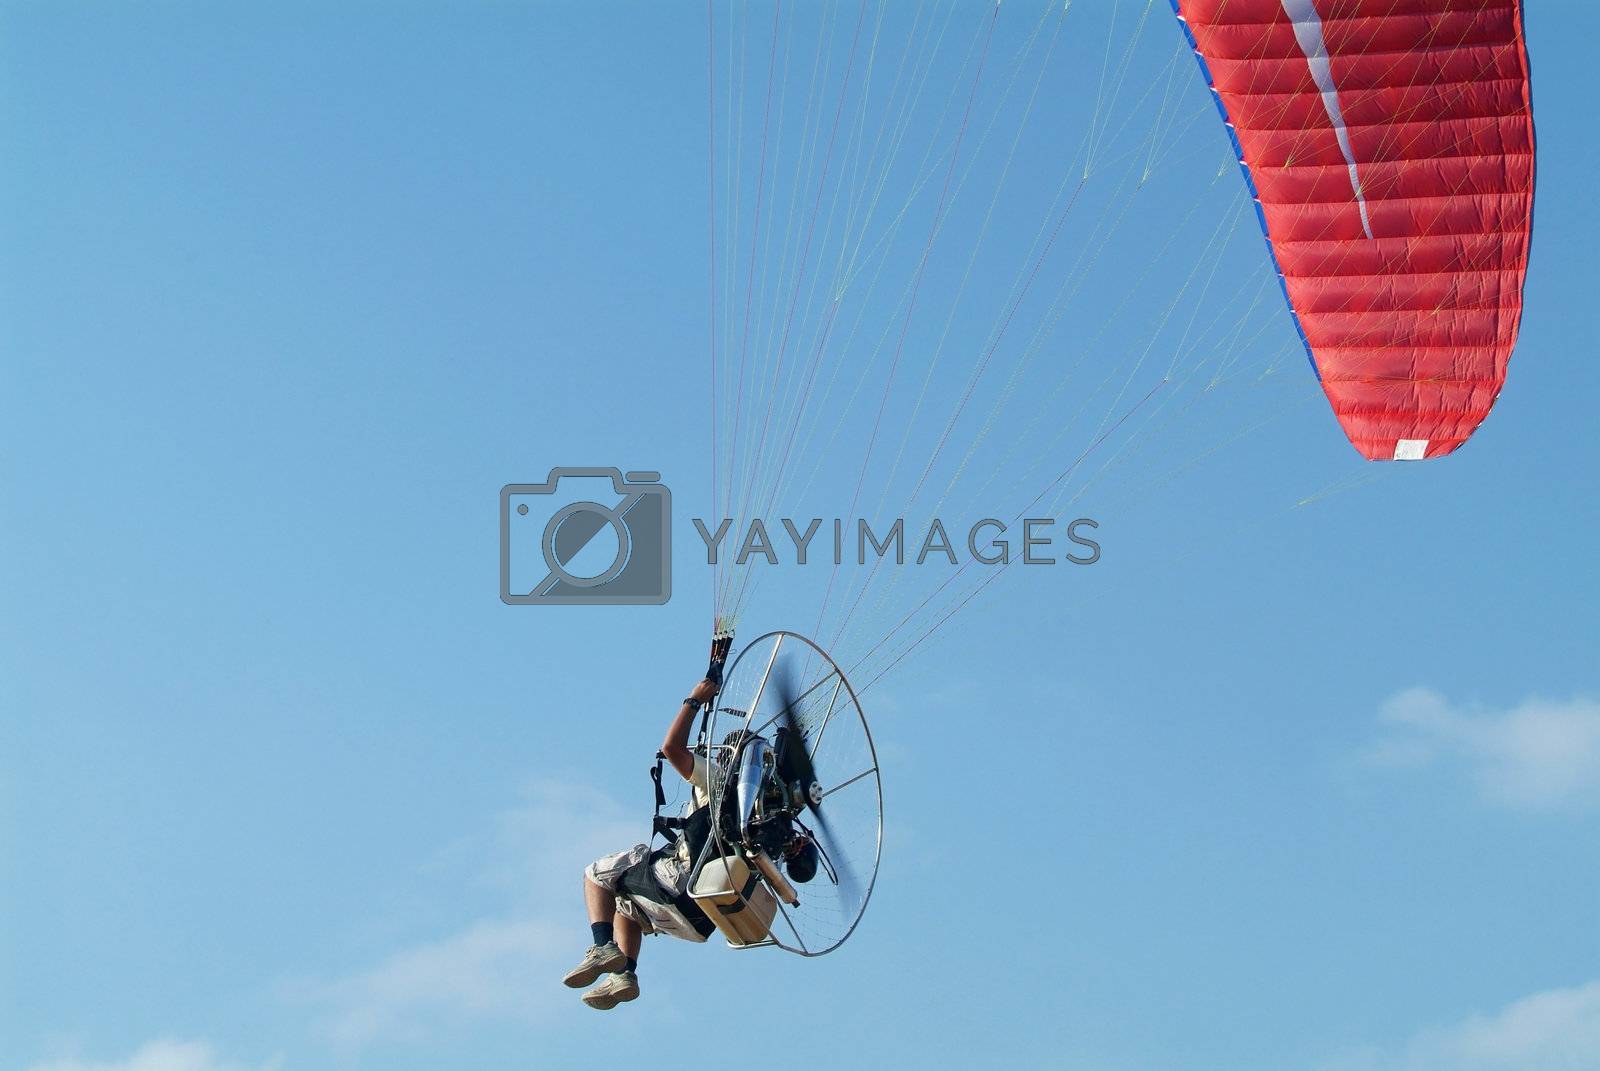 Royalty free image of Paramotor flying by epixx